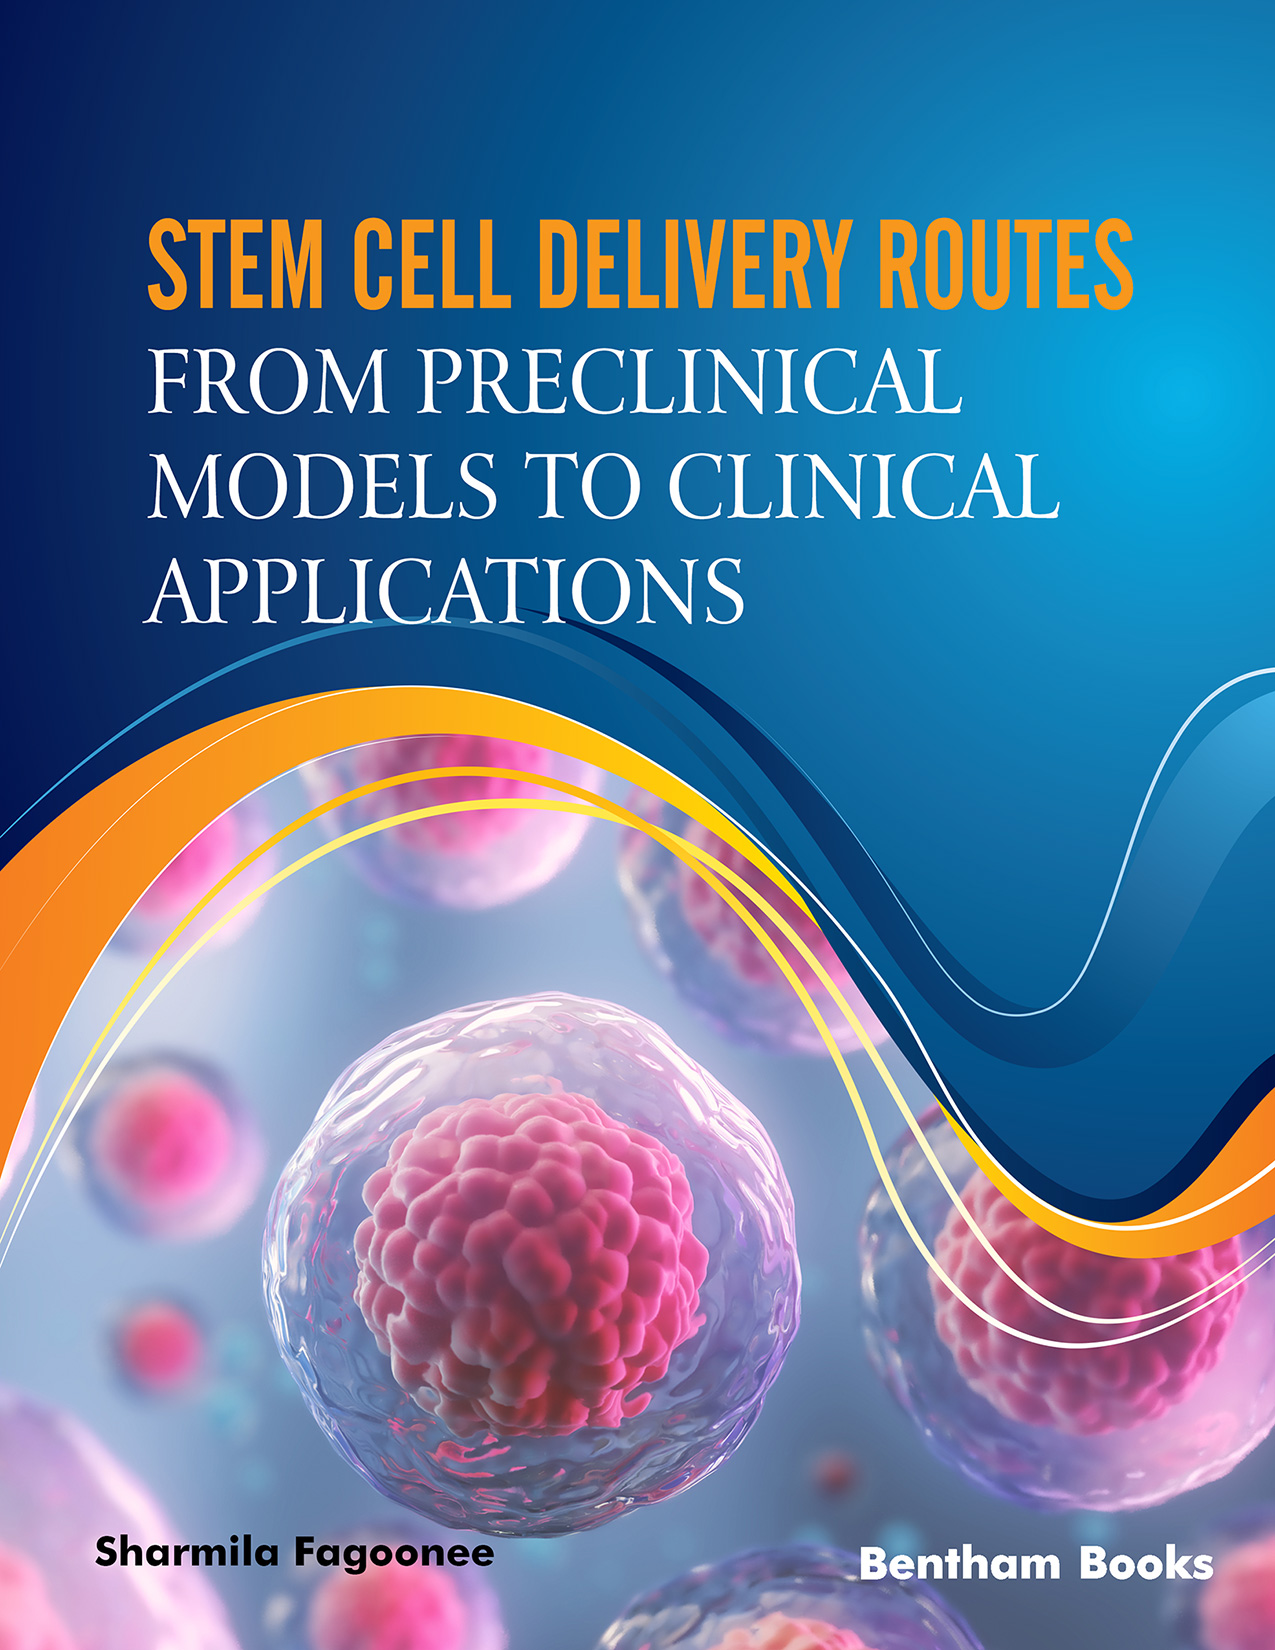 Stem Cell Delivery Routes: From Preclinical Models to Clinical Applications